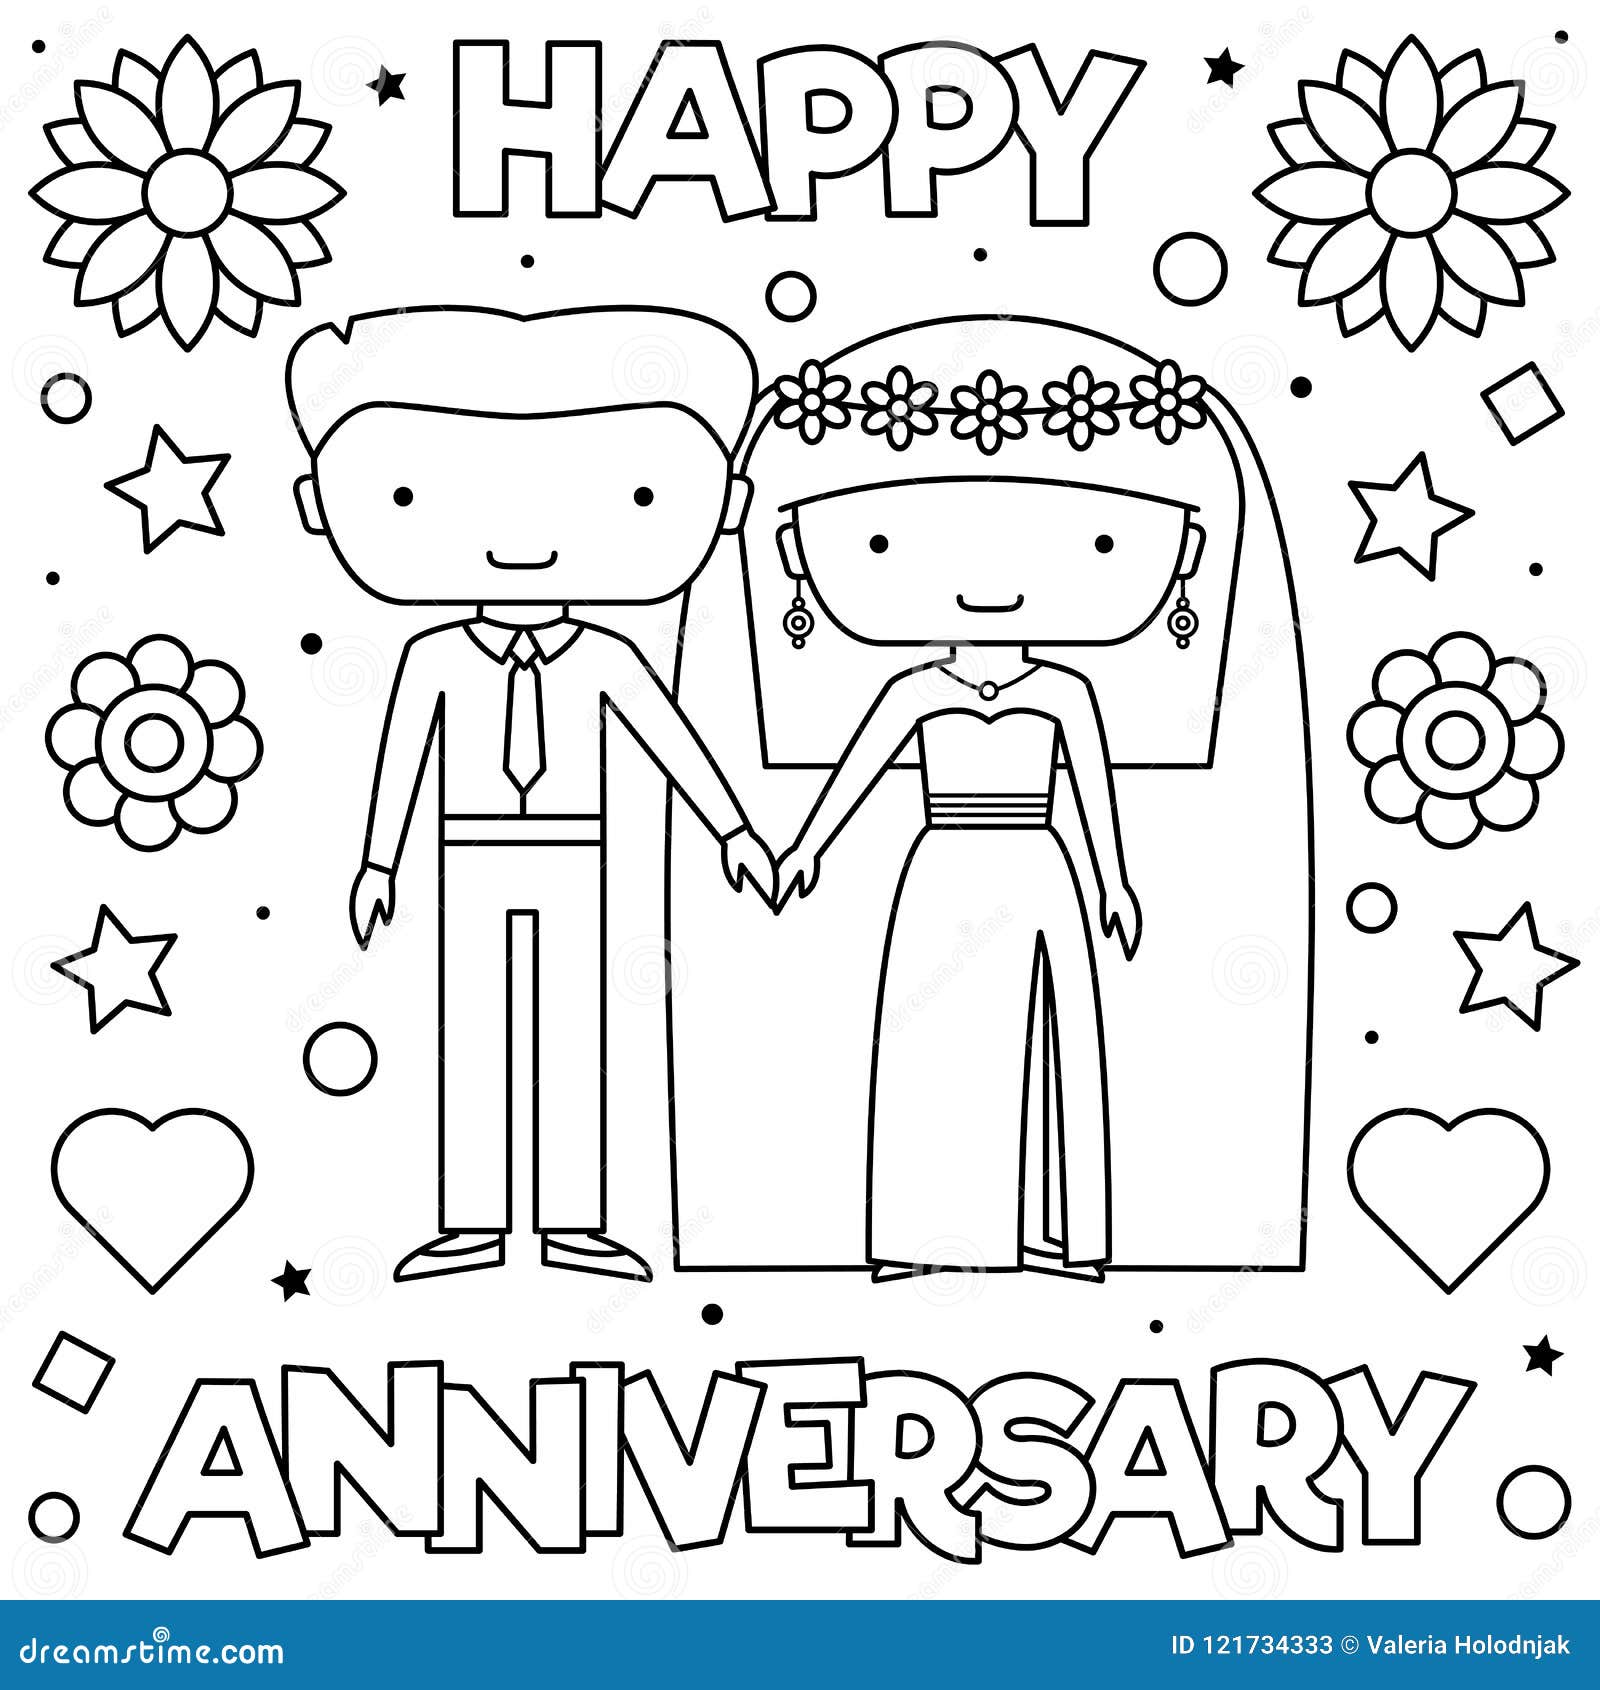 Couple coloring page stock illustrations â couple coloring page stock illustrations vectors clipart